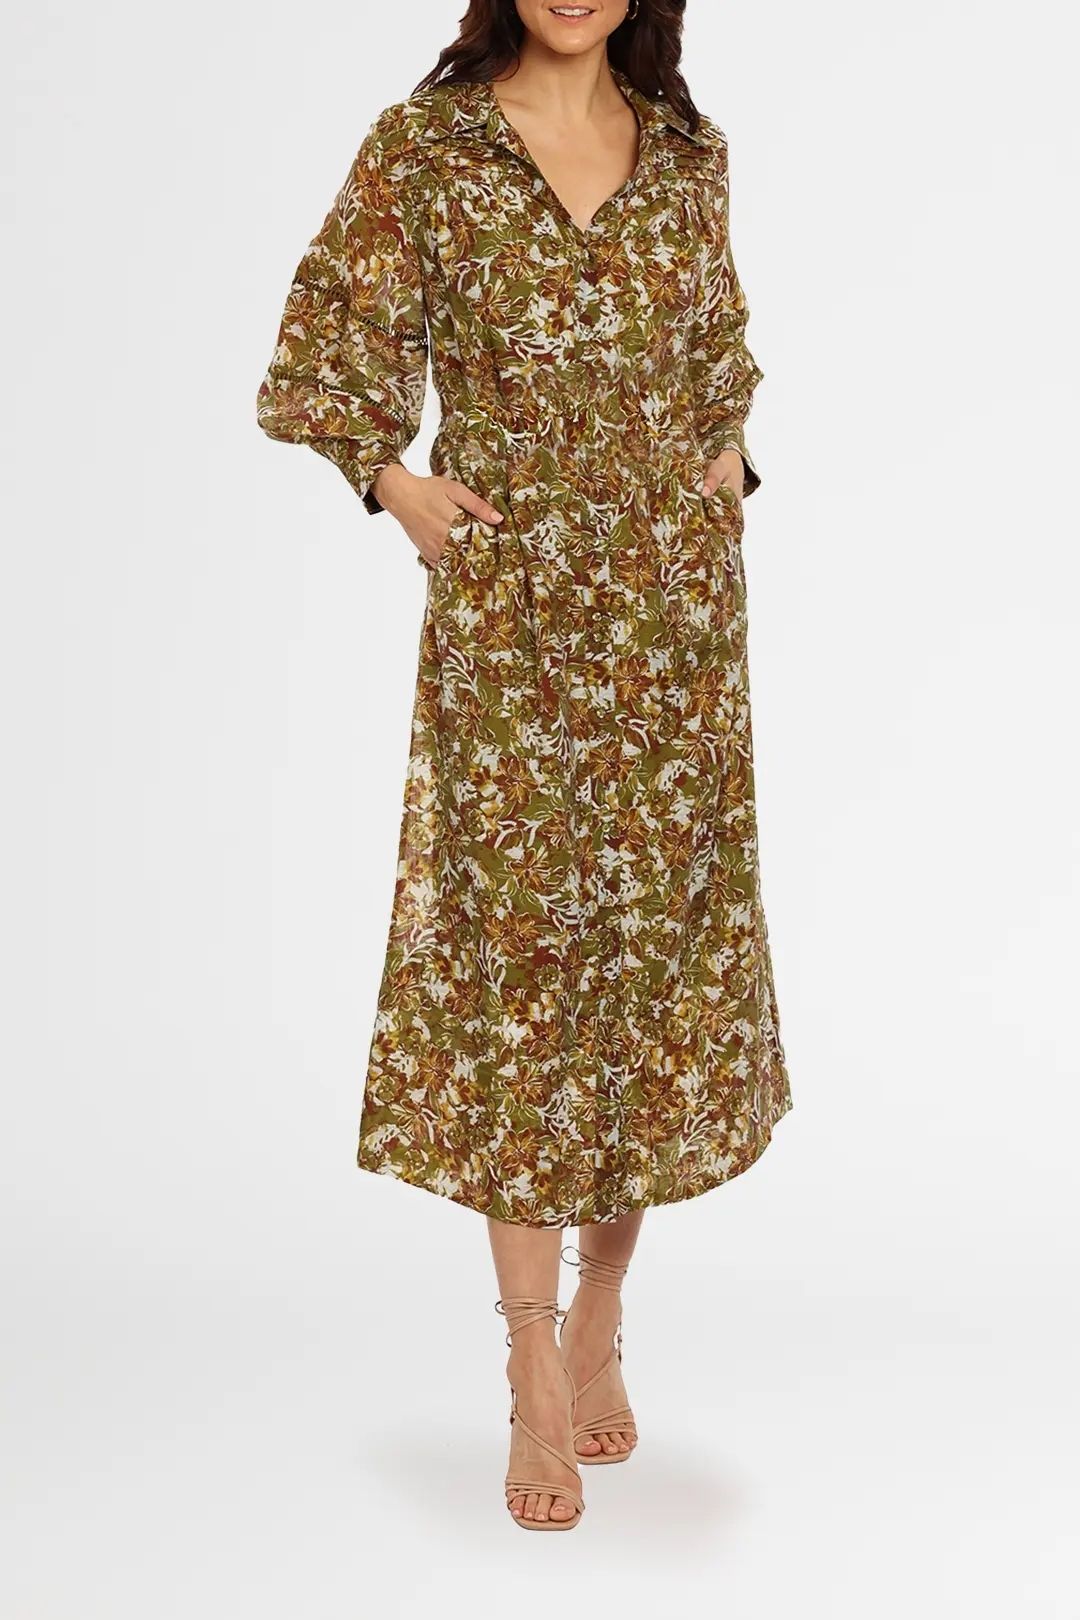 Ministry of Style Floral In Disguise Maxi Dress